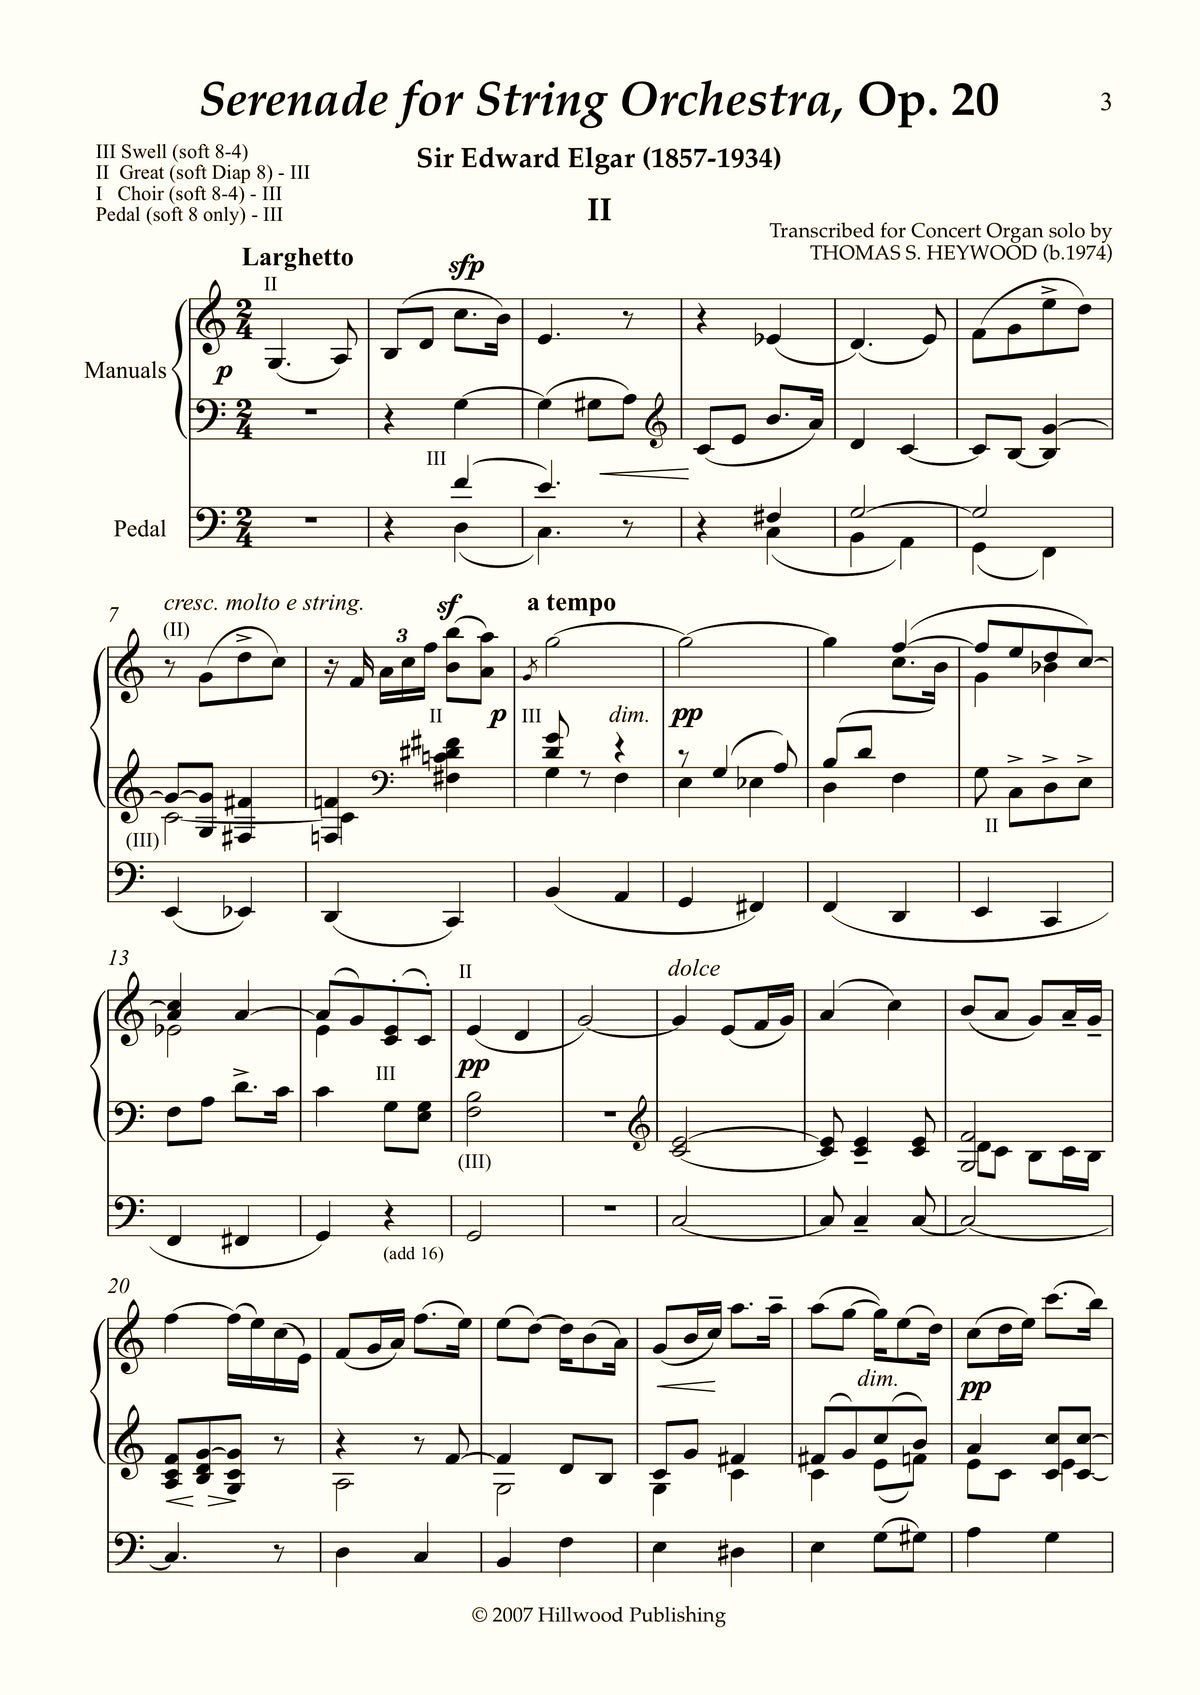 Elgar/Heywood - Larghetto from Serenade for String Orchestra, Op. 20 (Score)